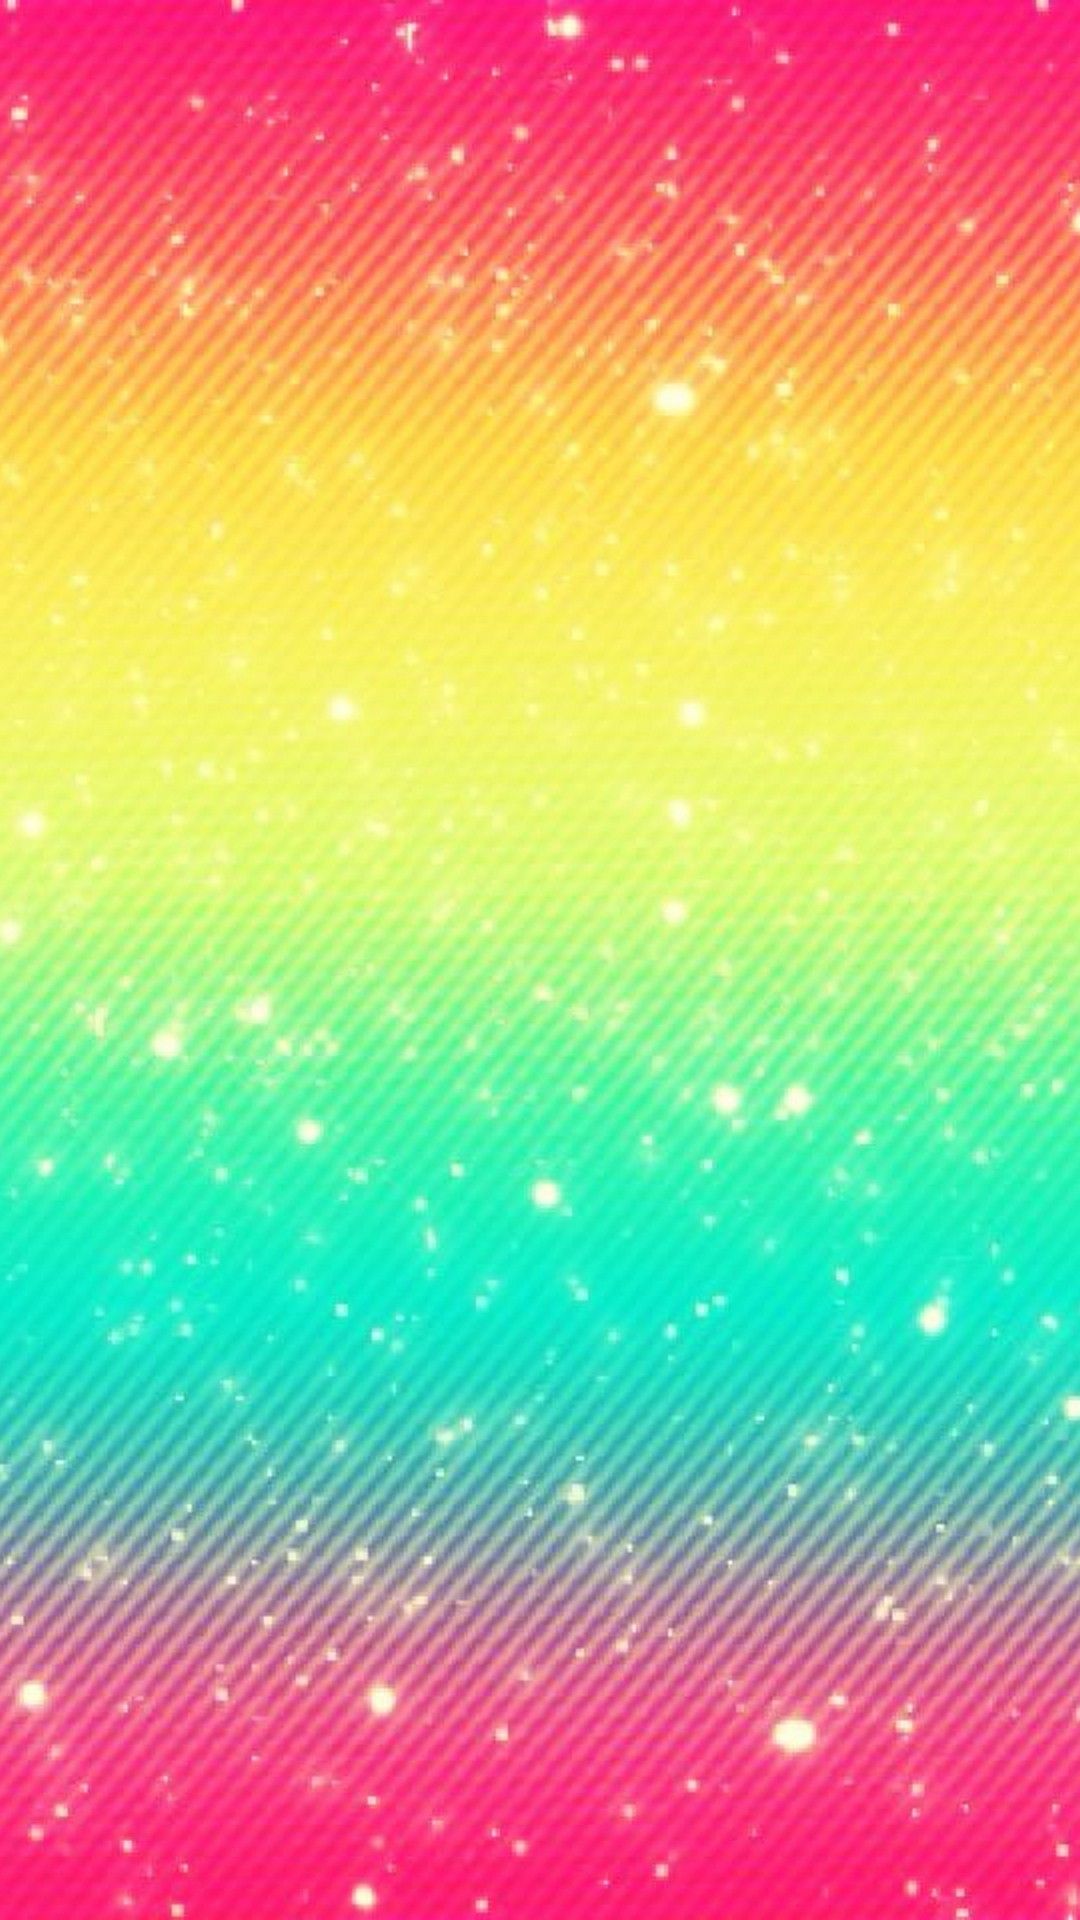 Rainbow Wallpaper Cute Girly For Android Cute Wallpaper